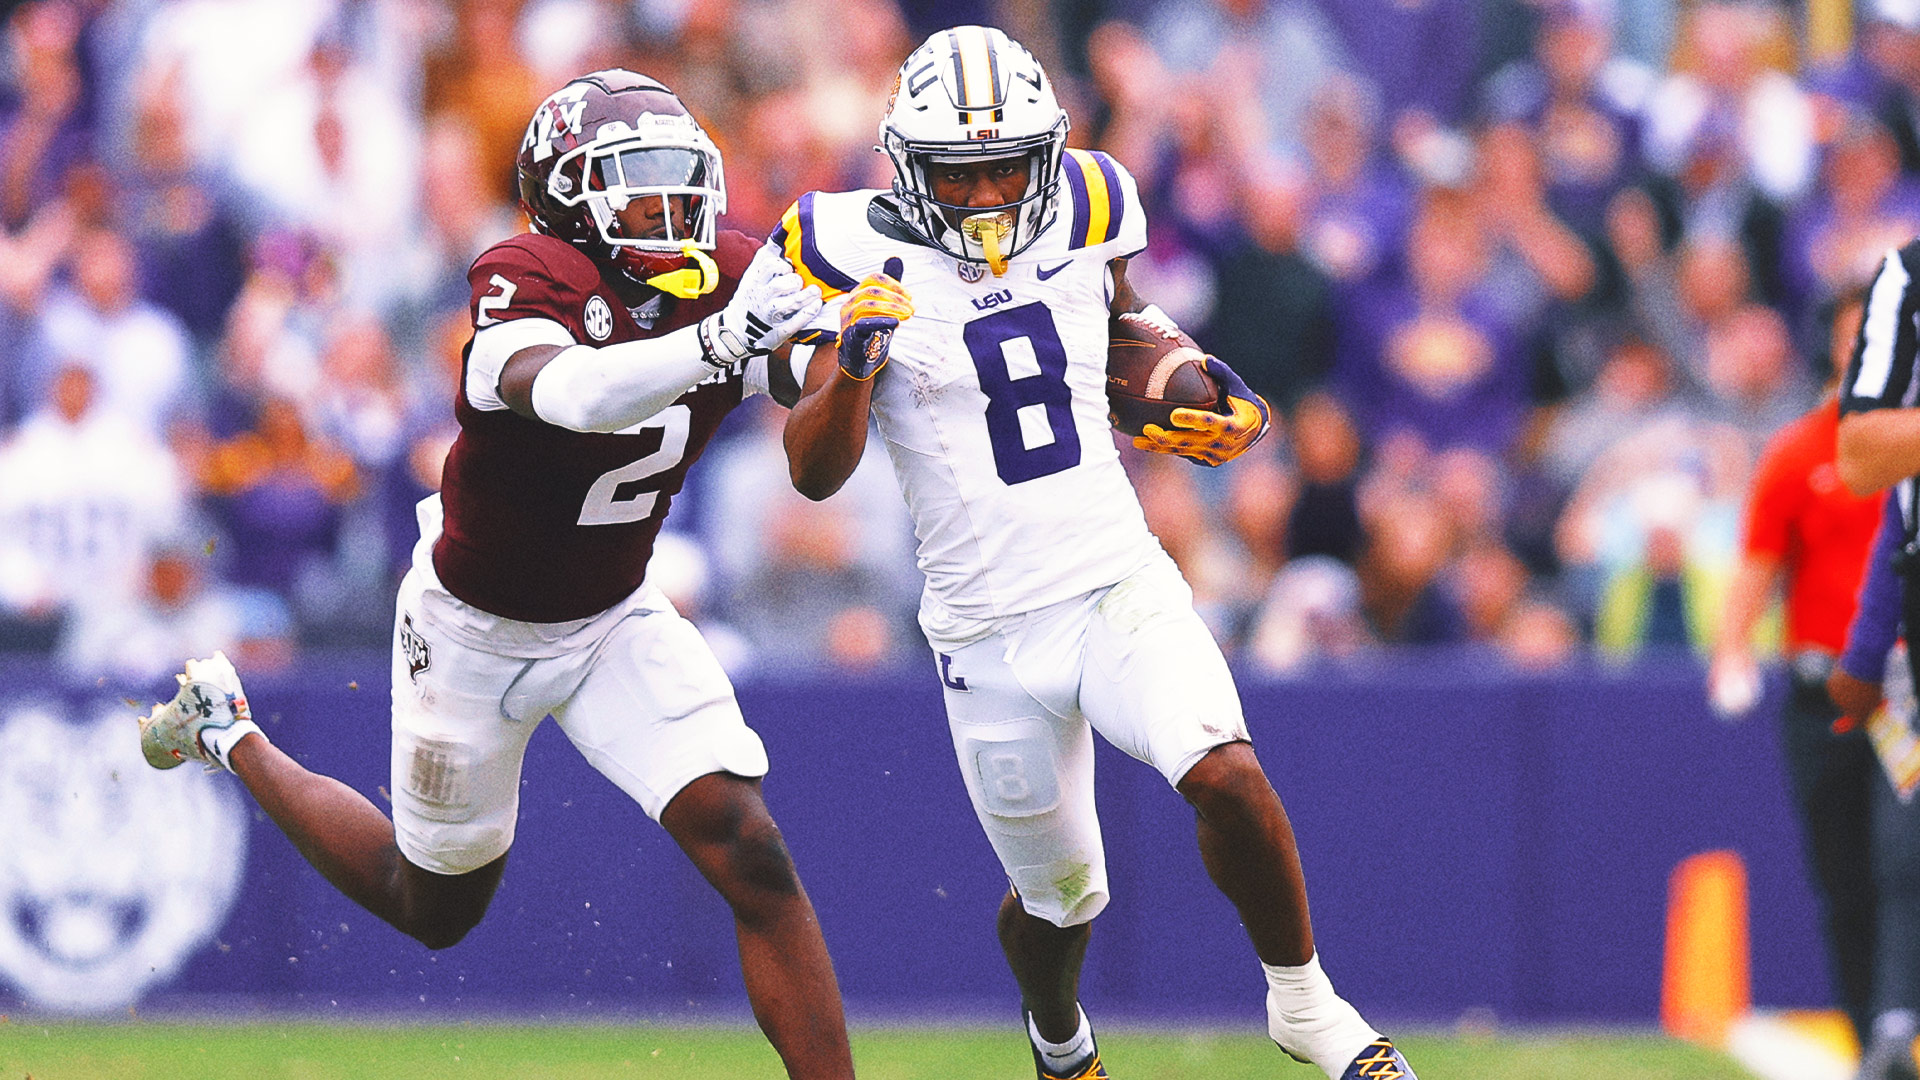 LSU's Malik Nabers, one of top WR prospects, declares for NFL Draft